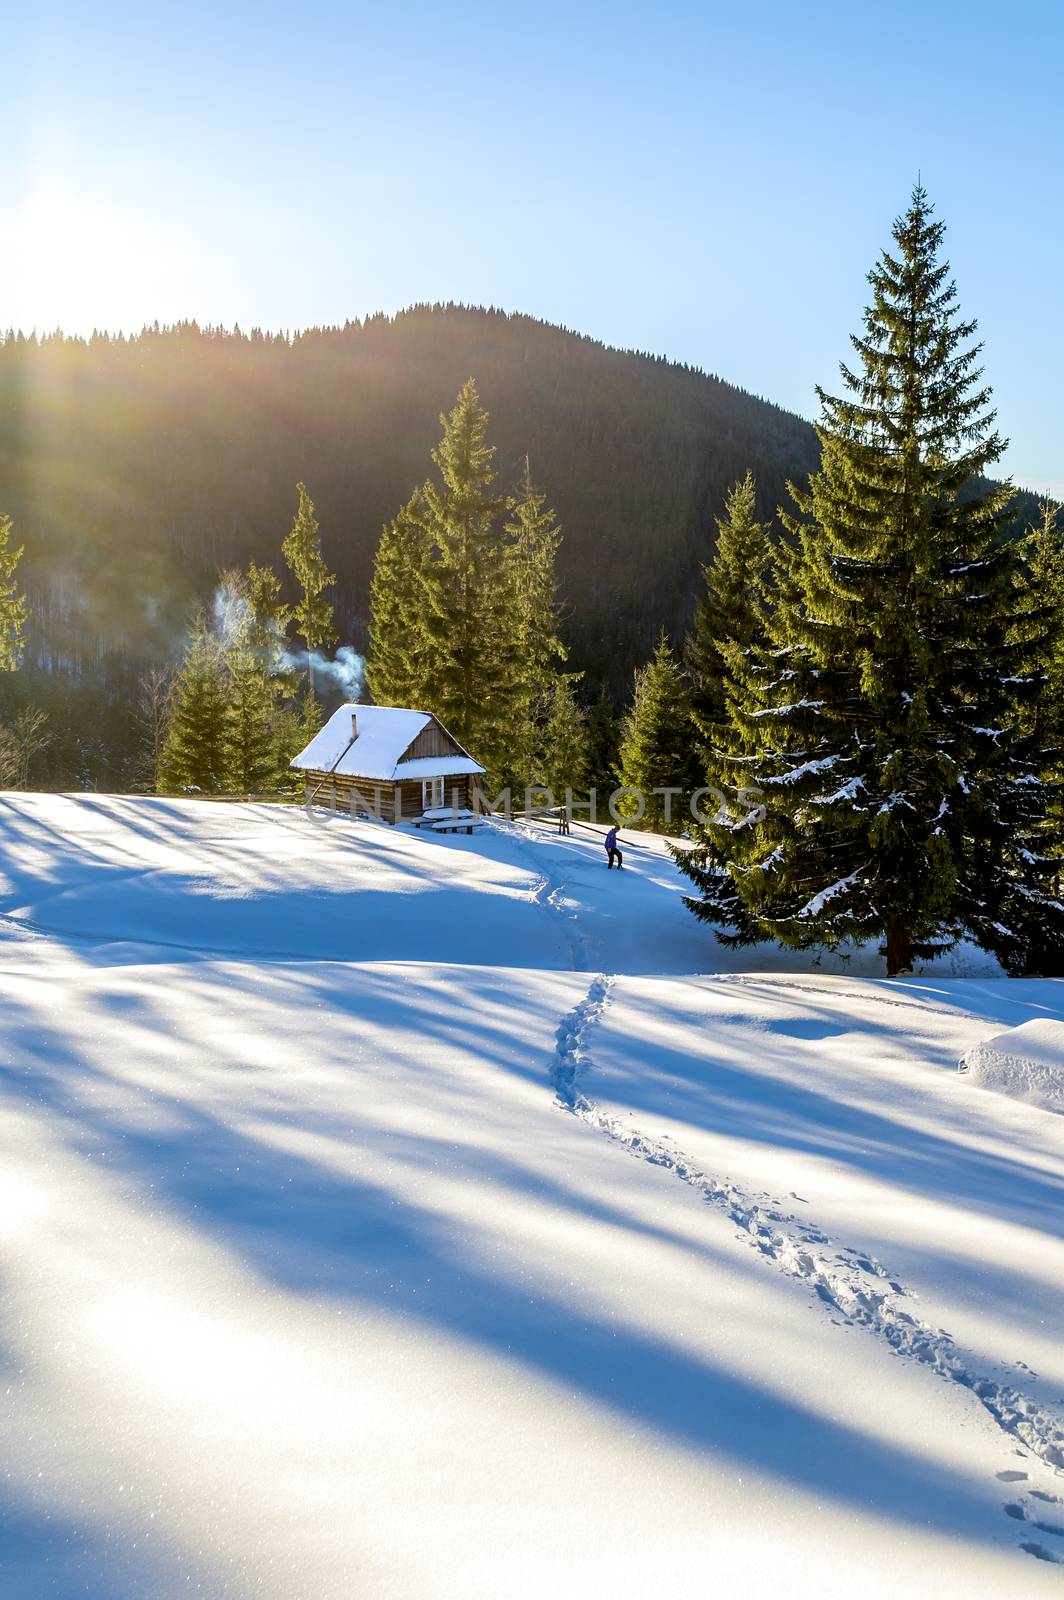 Snow trail that leads to a wooden cottage in the mountains. The spruce trees are covered with morning rays. Smoke coming out of the fireplace of the house. Winter in Ukrainian Carpathian Mountains.